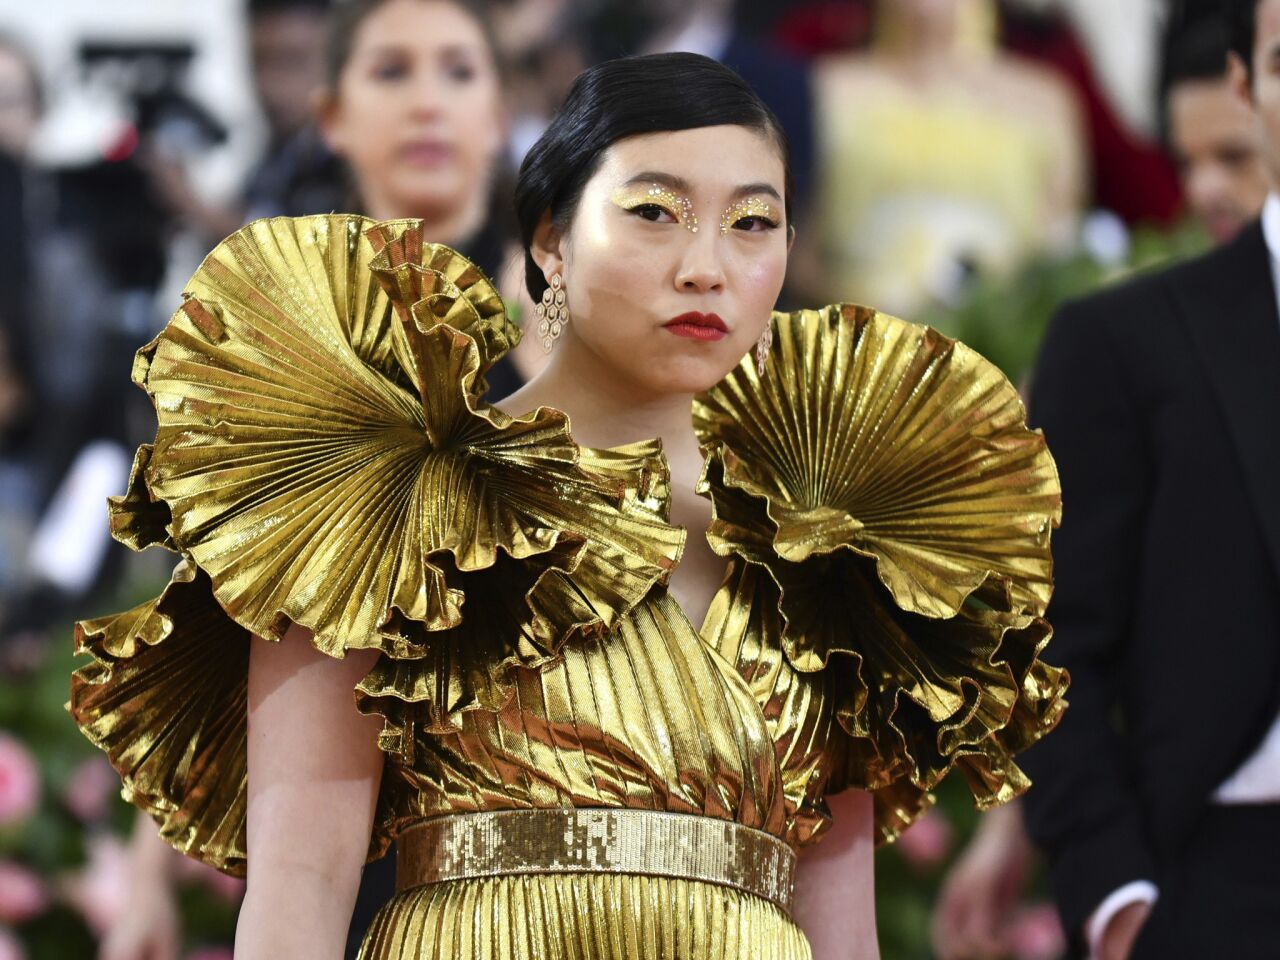 Awkwafina's gold eye makeup continues the theme of her Altuzarra gown.